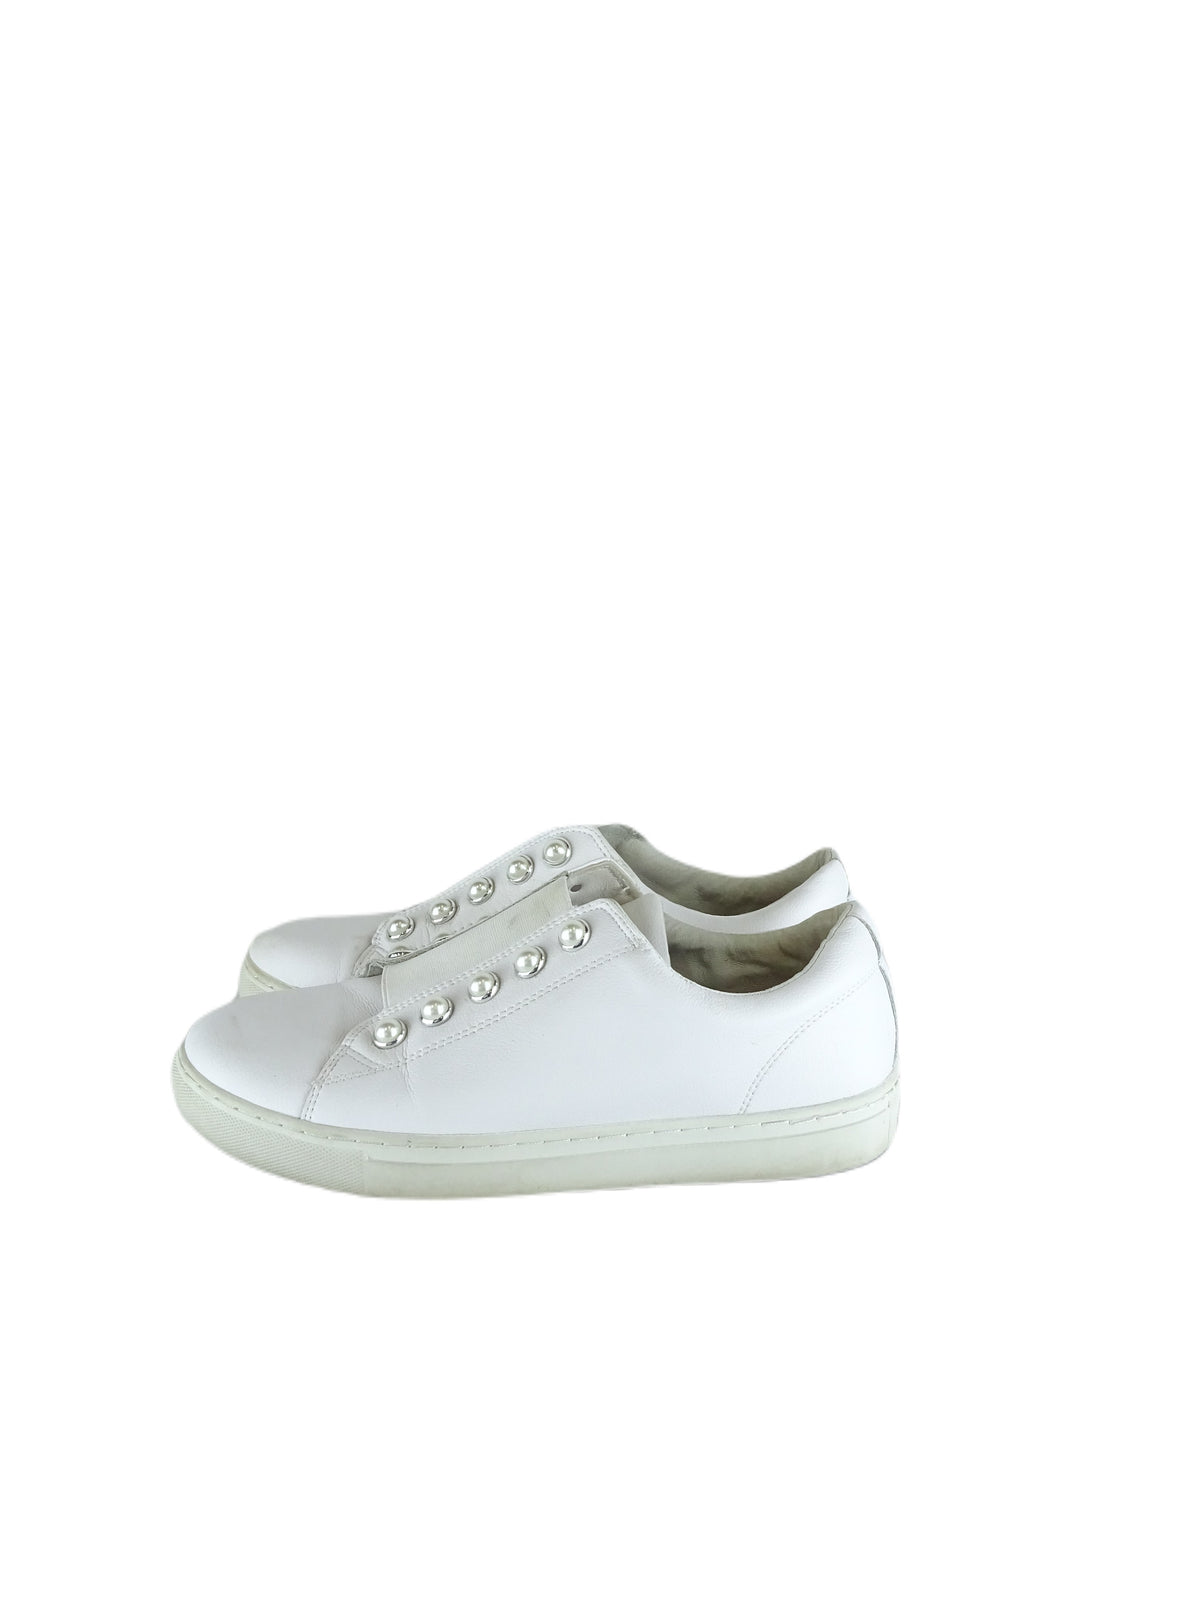 Blue Illusion White Leather Sneakers 40